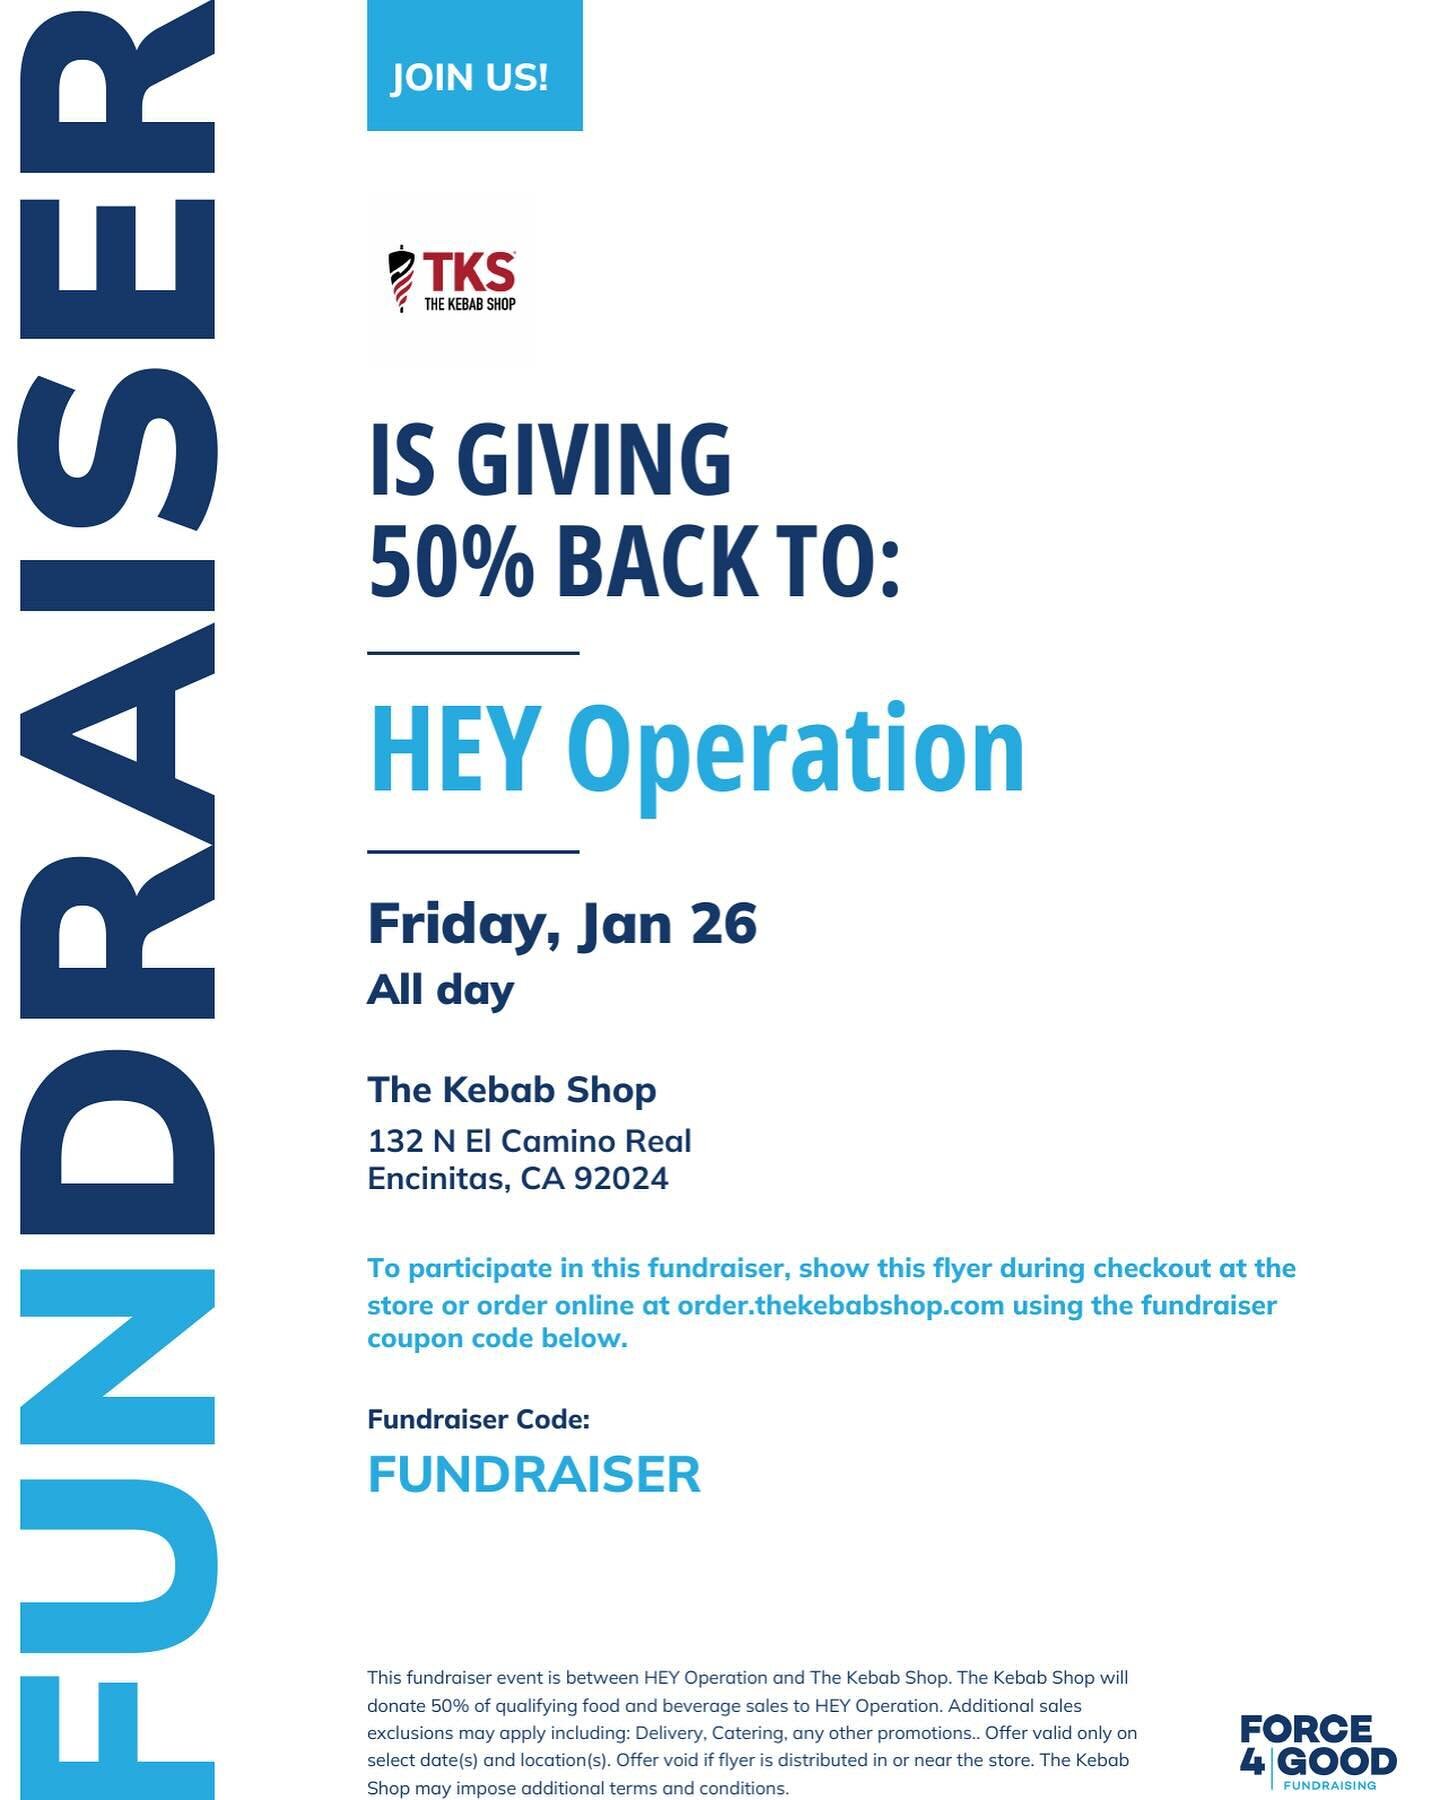 We are kicking off the year with The Kebab Shop in Encinitas! This Friday, January 26, the Kebab Shop will be donating 50% of their sales from the day to HEY Operation. 

Enjoy some delicious food while helping to provide joy and healing to displaced